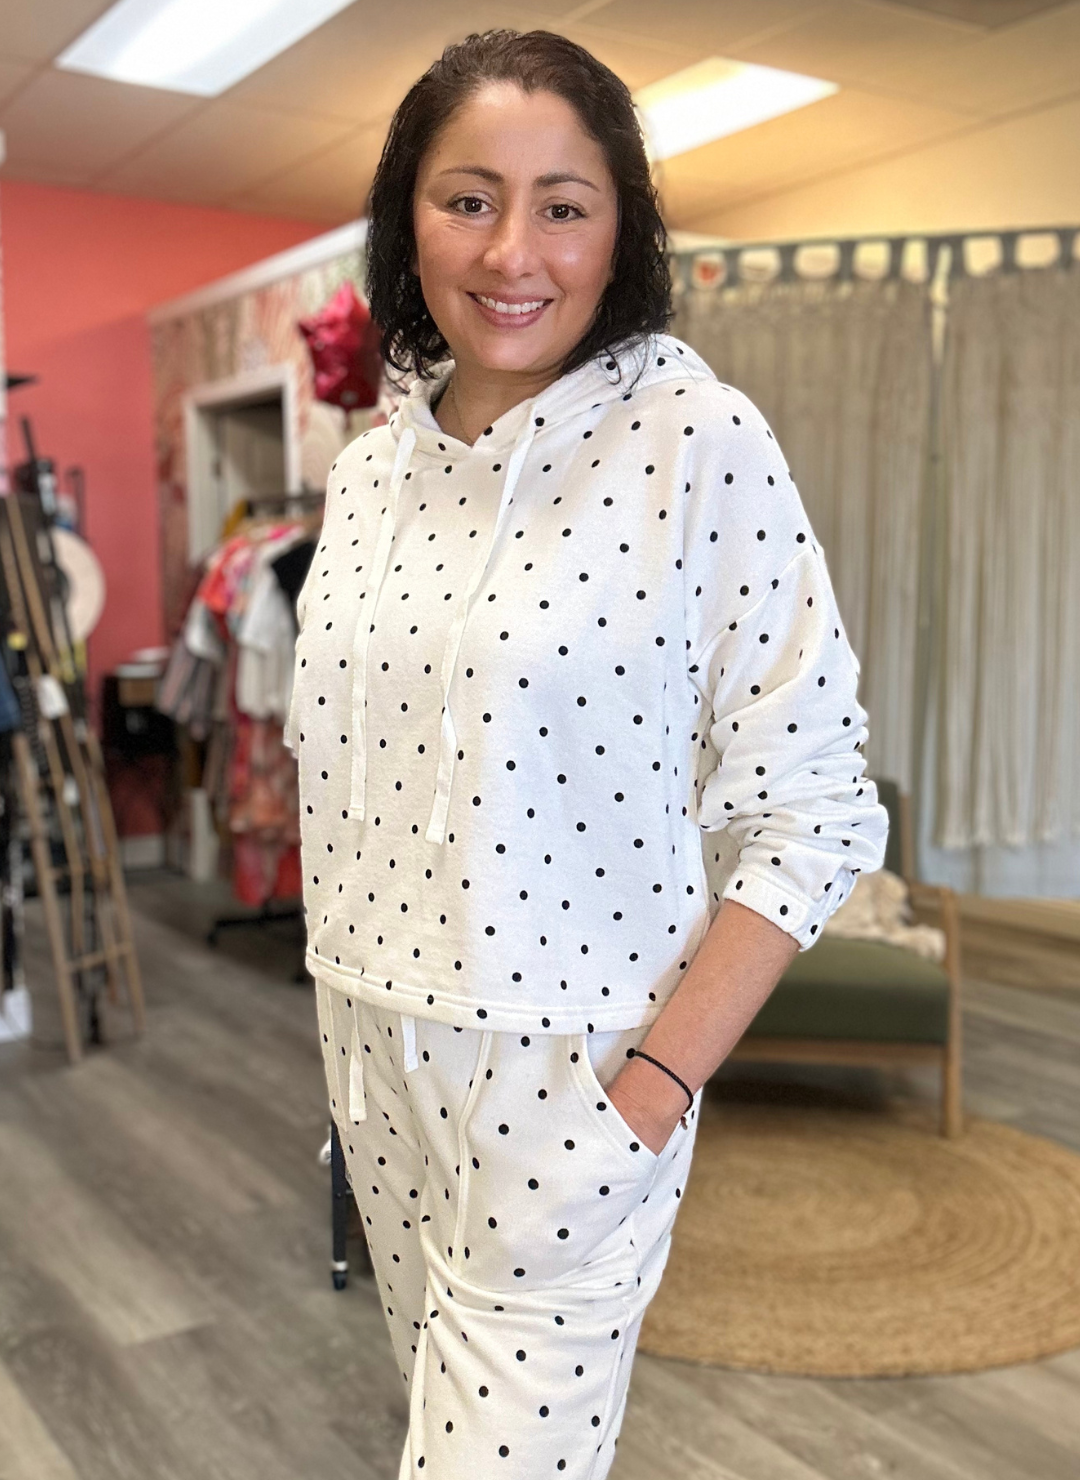 Front view of the model wearing the LS Polka Dot Princess Pullover and Pants. Showing the pockets on the pants and strings on the pullover. Then pushing the sleeve to her elbow showing texture.